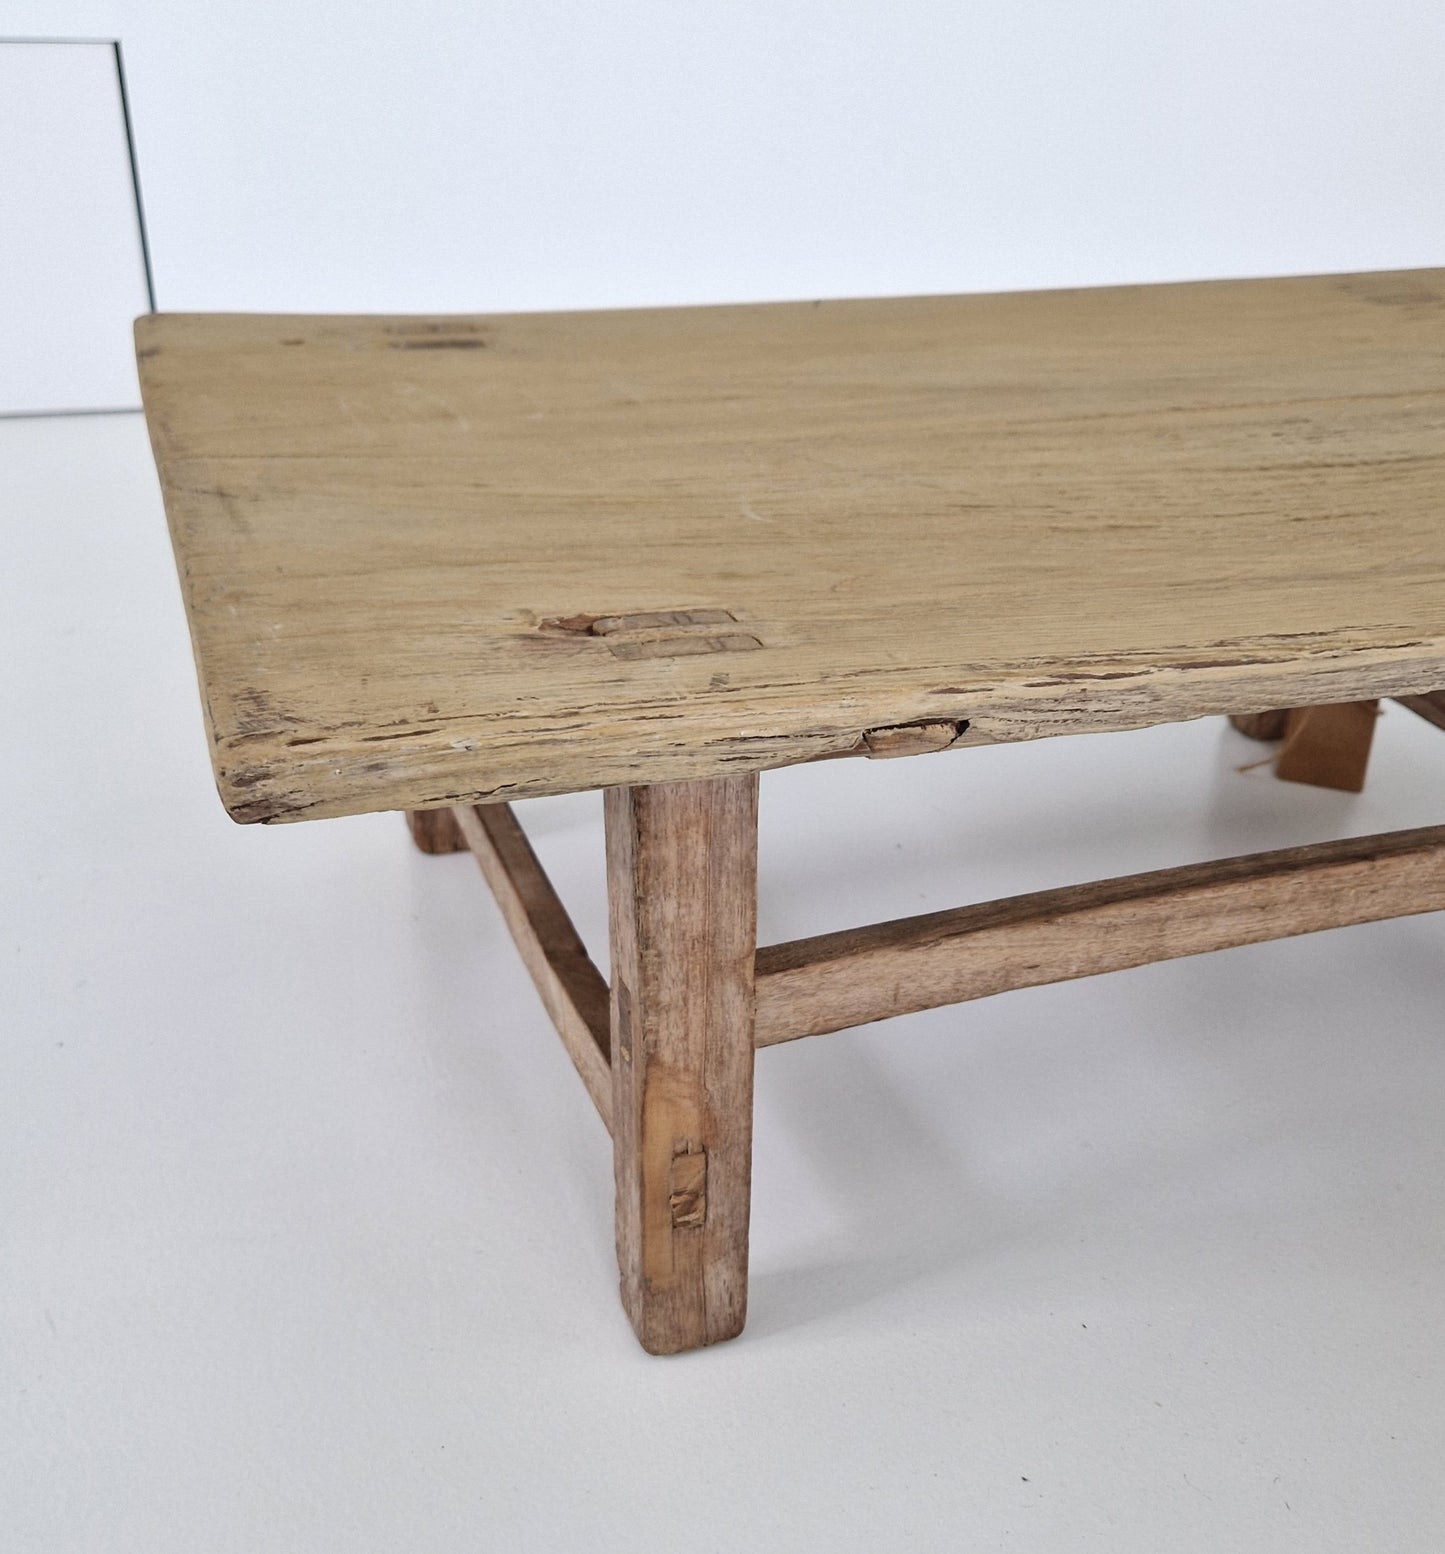 Chinese old wooden table #2 (80x49x27)